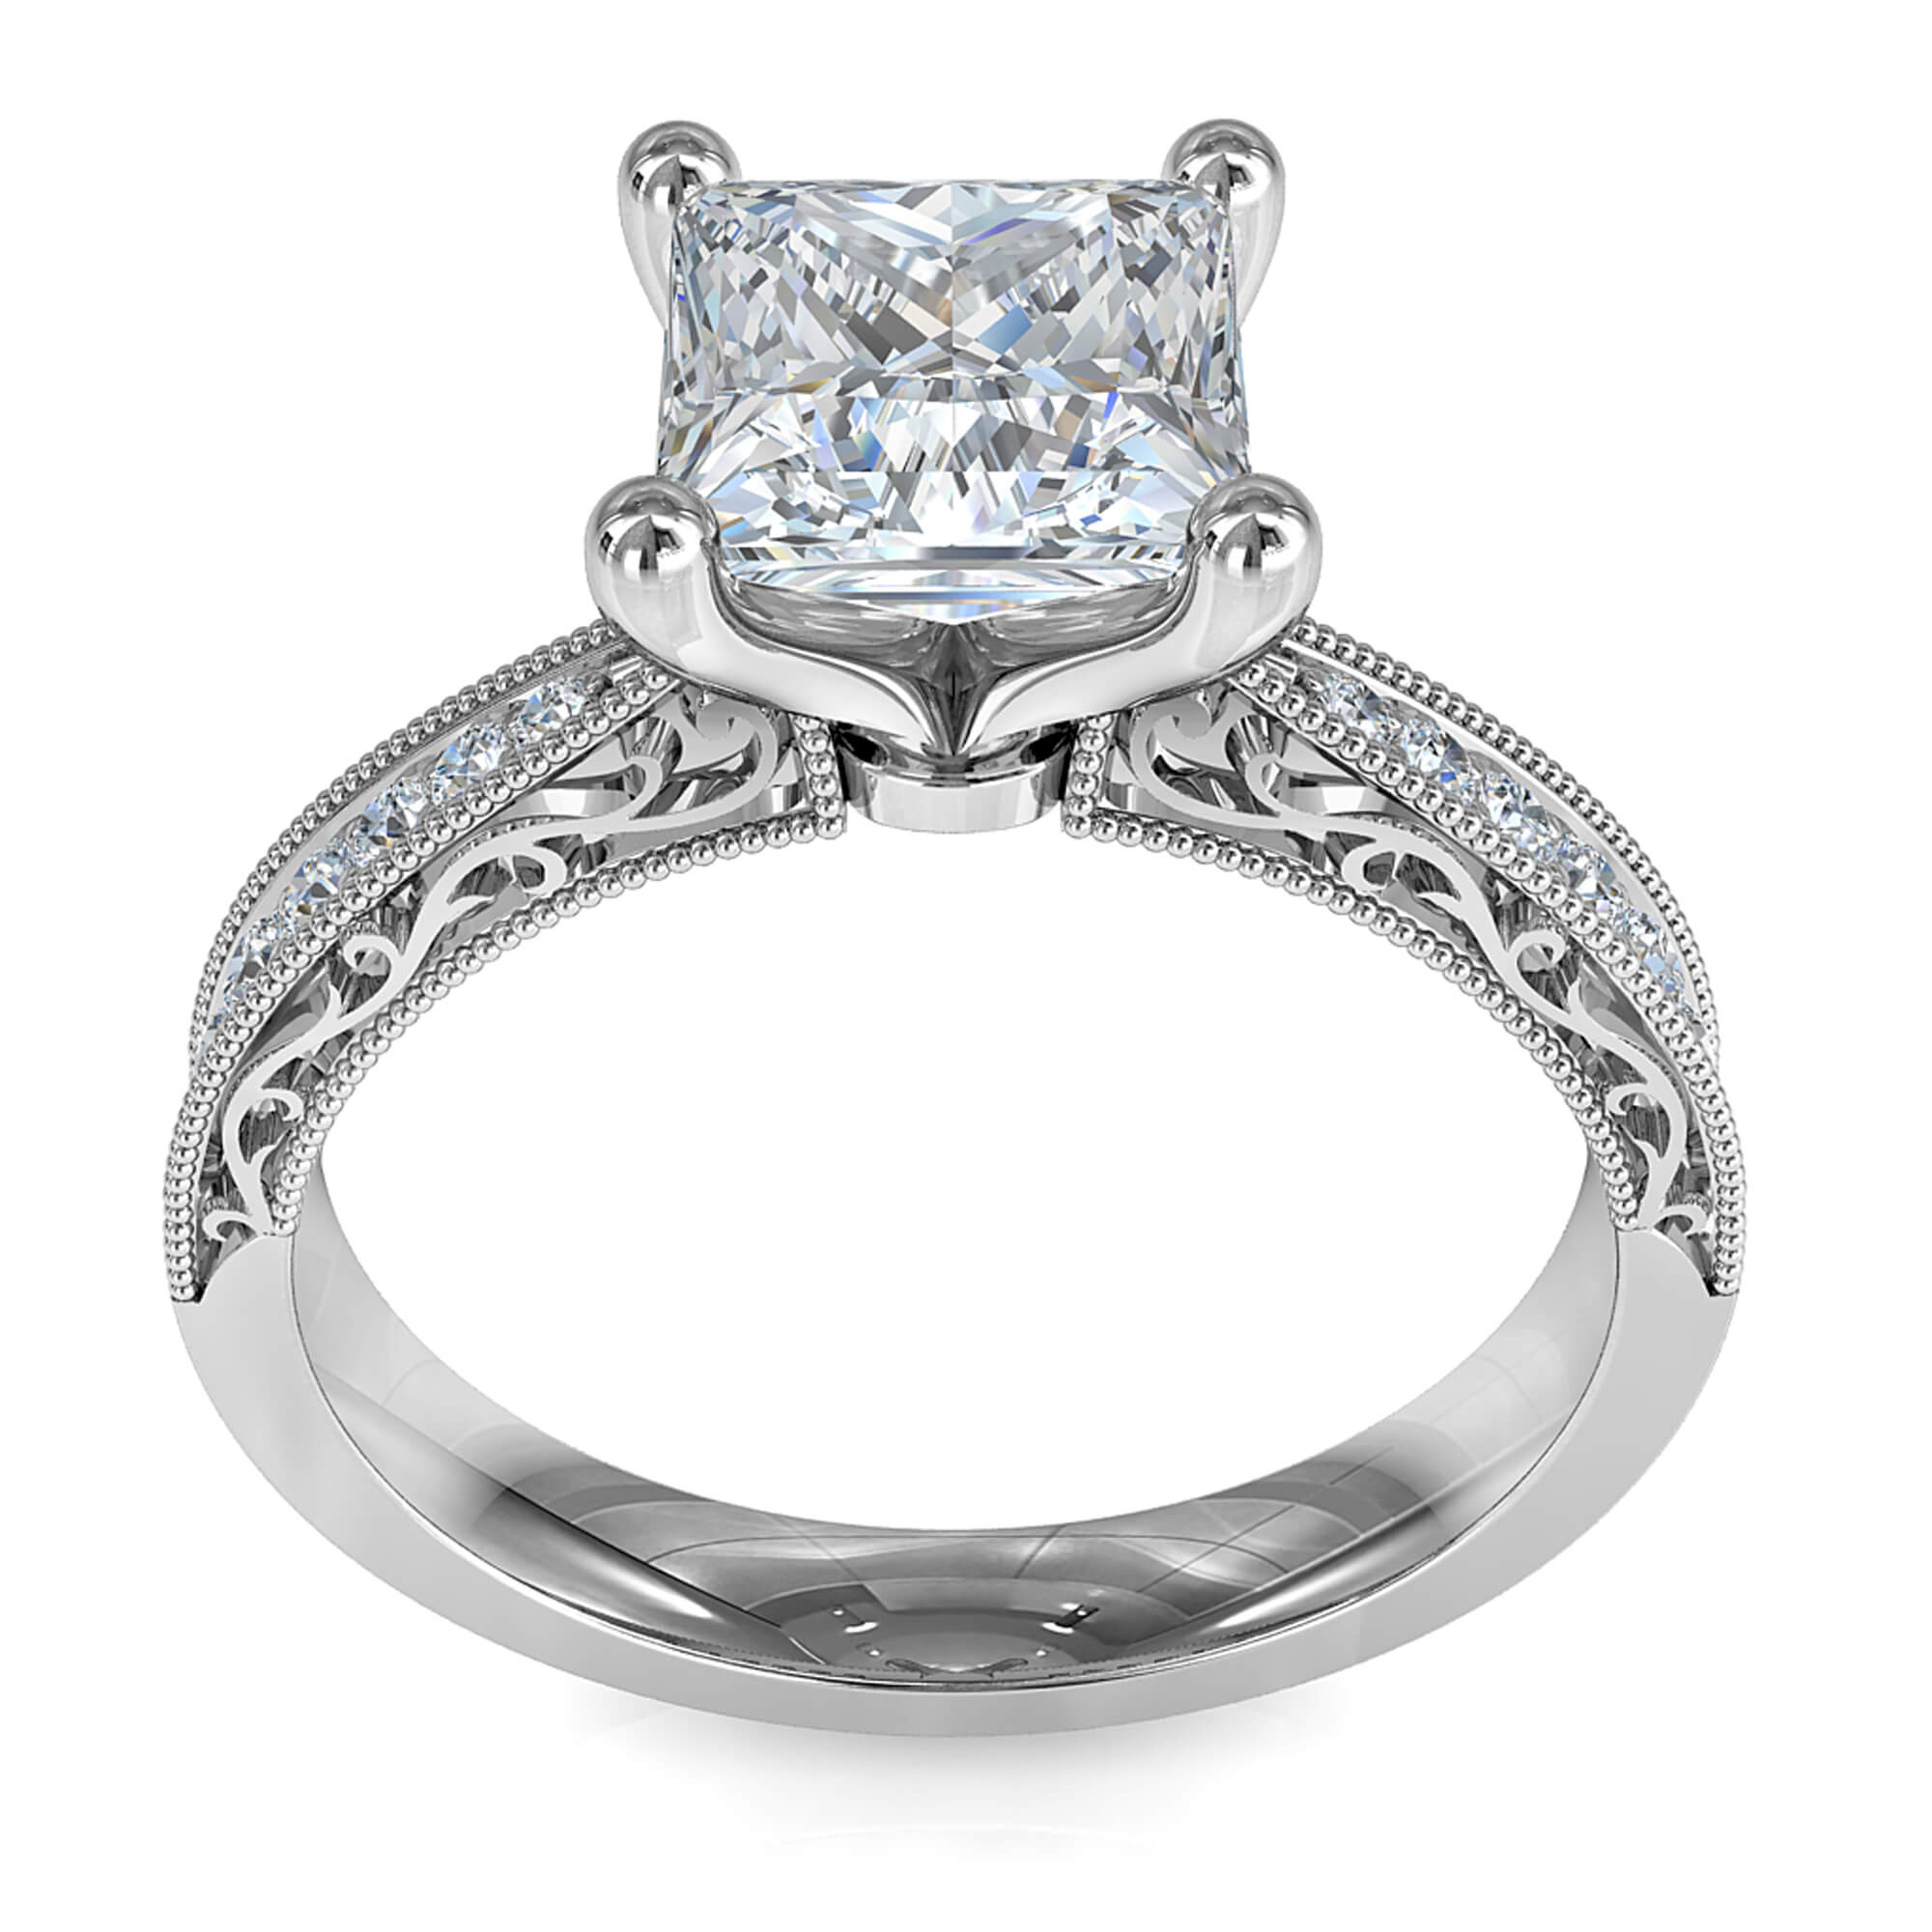 Princess Cut Solitaire Diamond Engagement Ring, 4 Claws on a Bead Set Band with Vintage Scroll Detail on Outer Edge of Band.